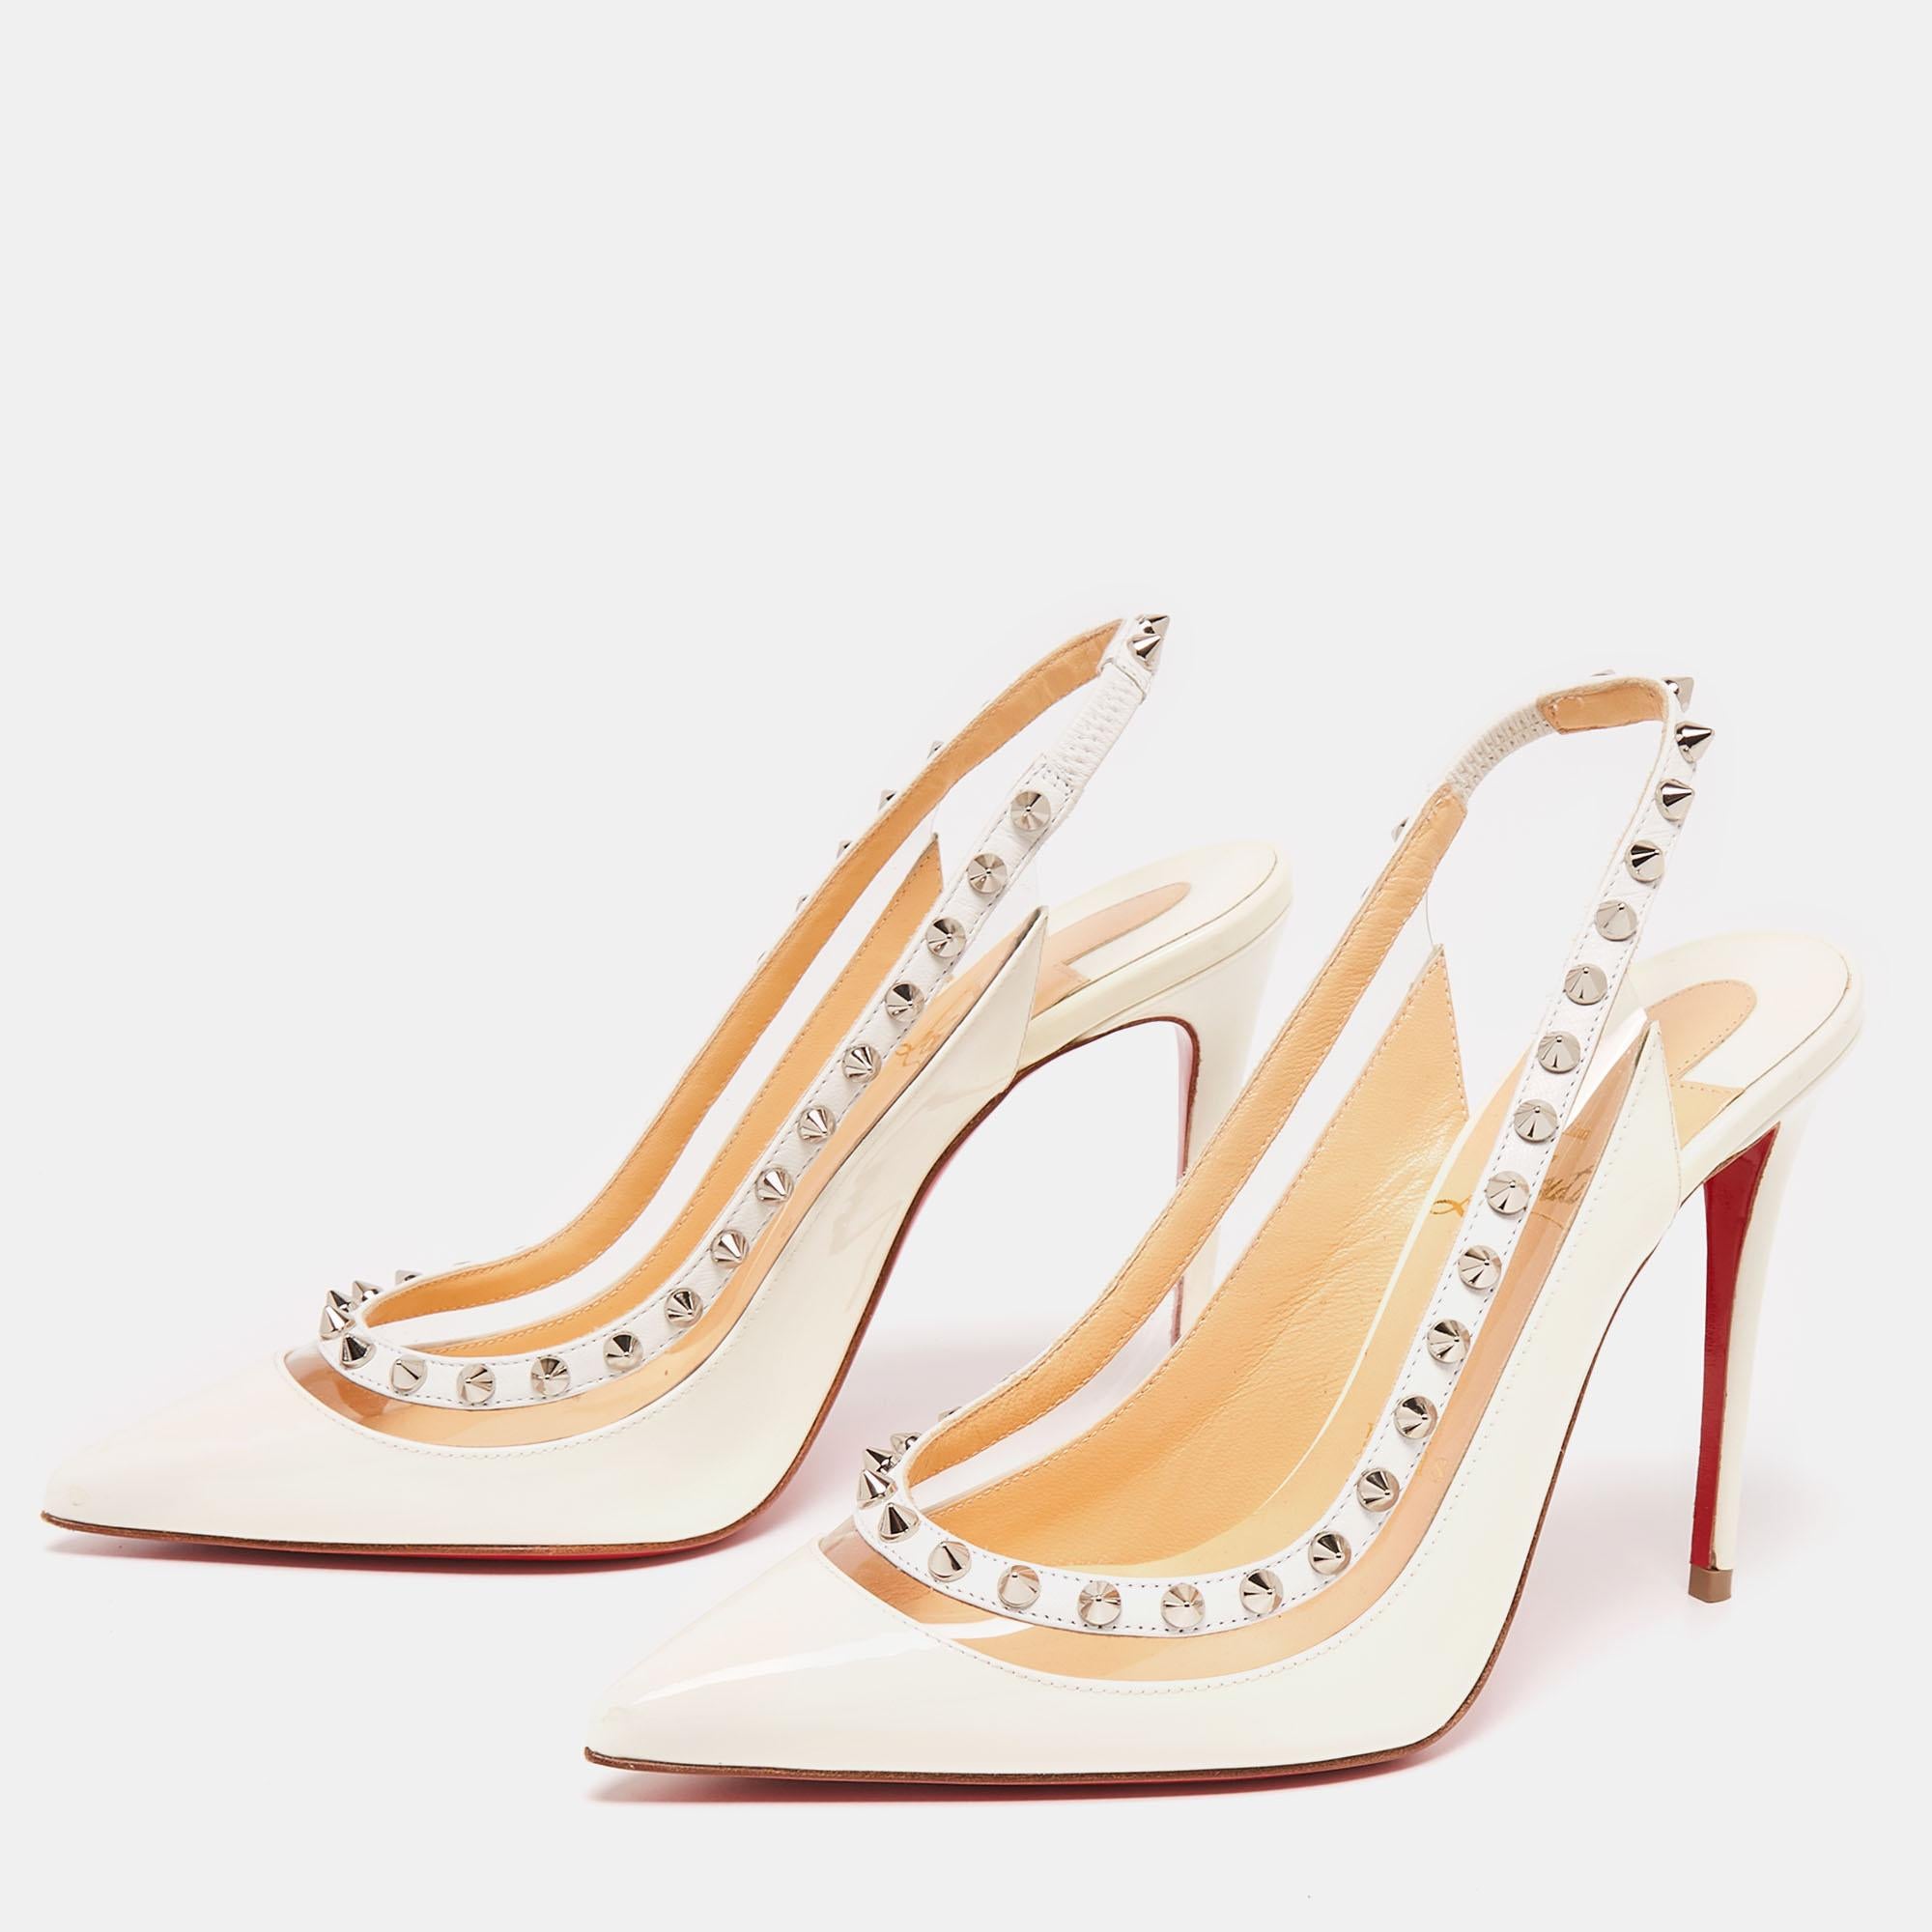 Rock these Christian Louboutin spike pumps at the next party! They have been crafted from patent leather and PVC into a slingback design and come with comfortable insoles. Pair the chic 10 cm heels with leather jackets for an edgy appeal.